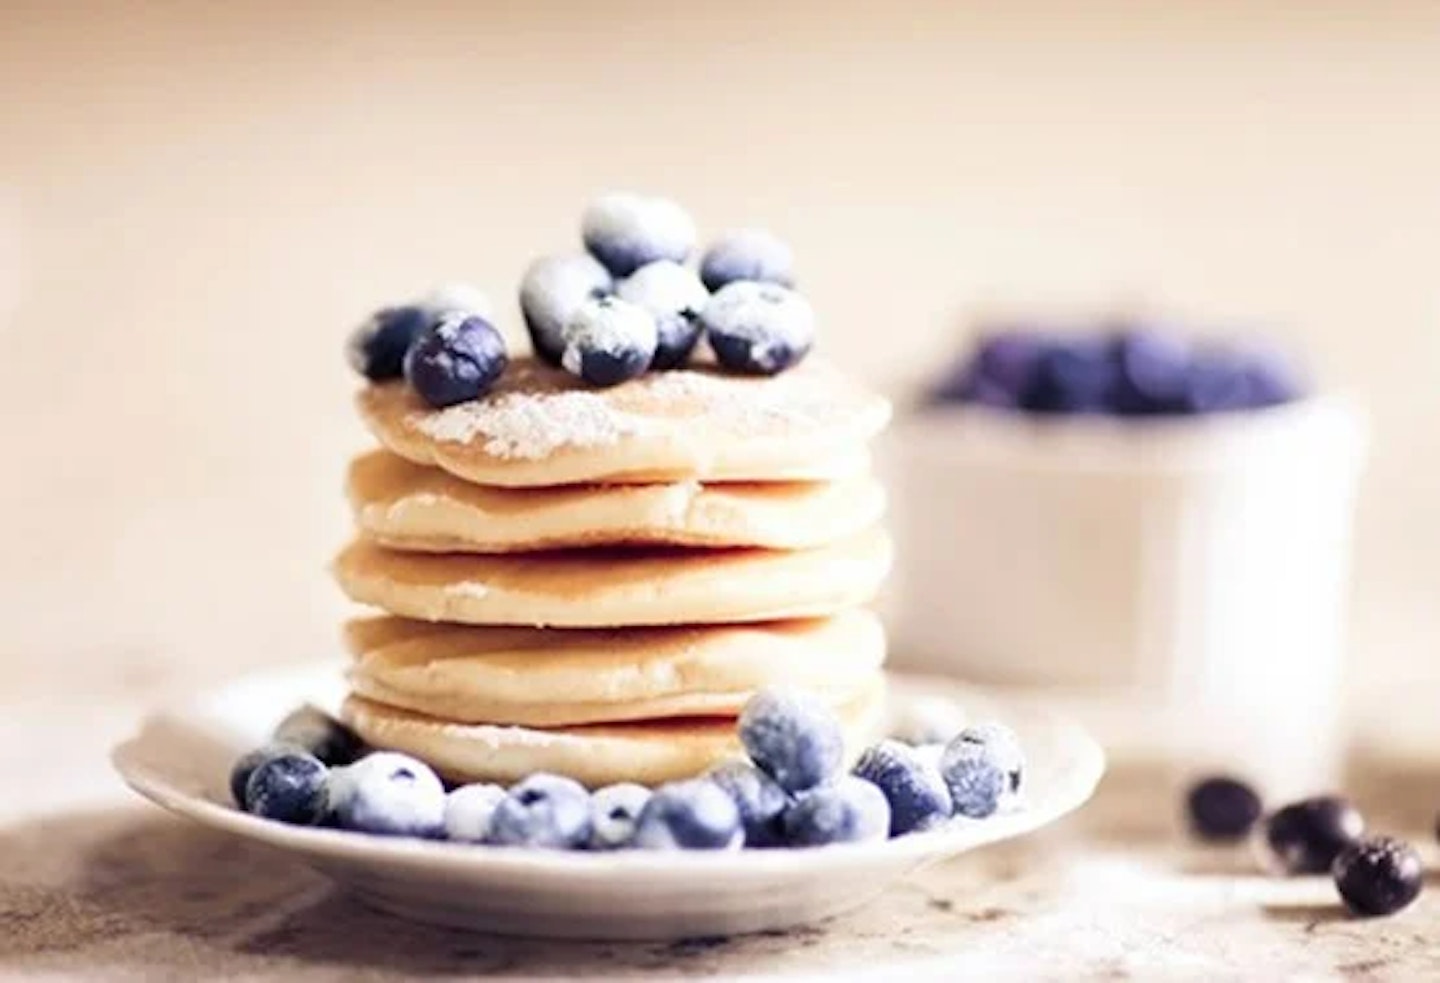 Wholewheat pancakes with blueberries